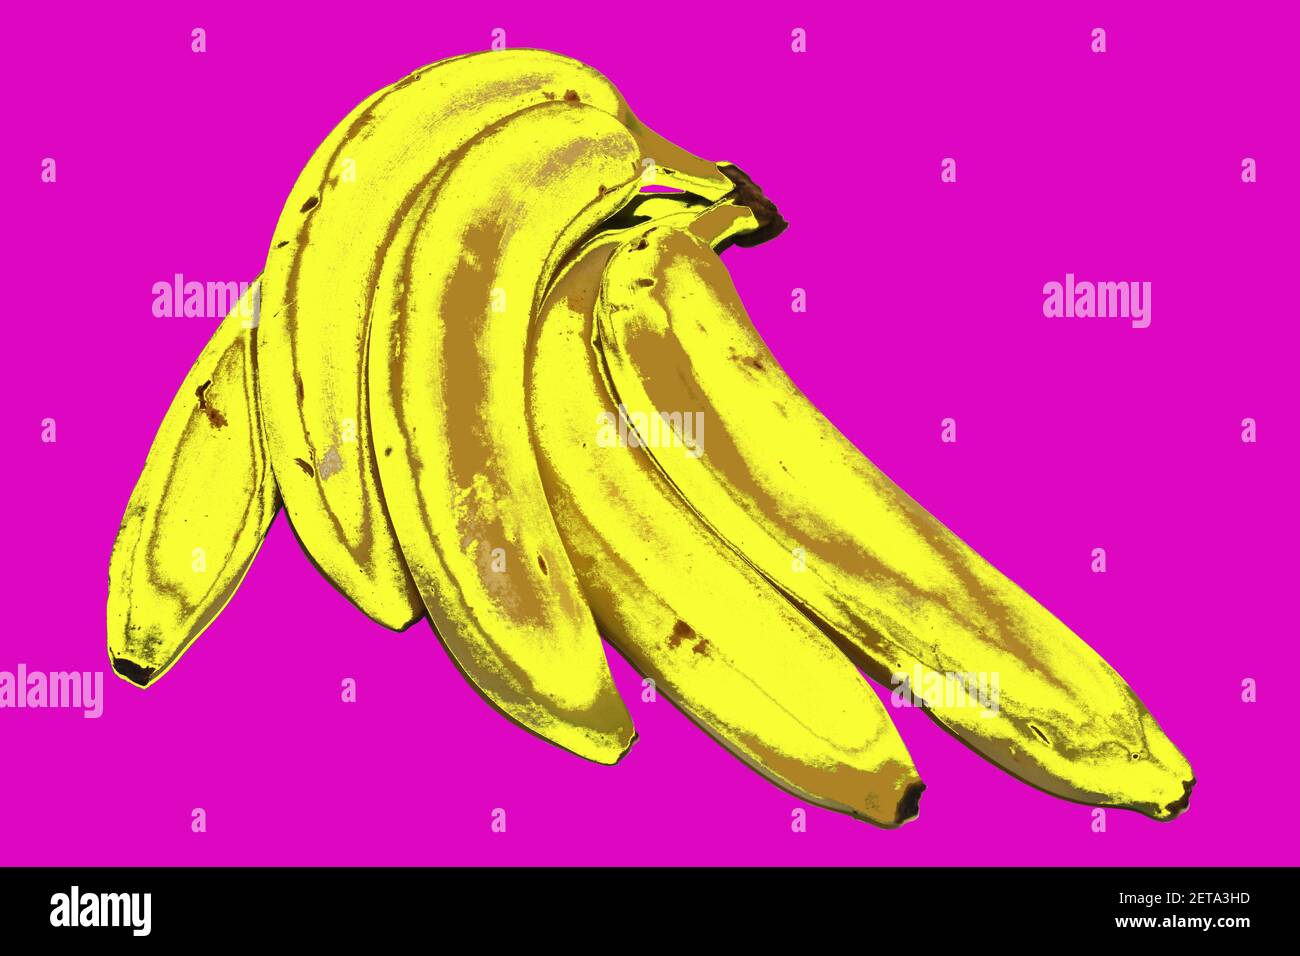 Bunch of yellow bananas against a hot pink background. Mixed media photograph. Pop art and bananas. Bananas captured in artwork and comedy. Stock Photo